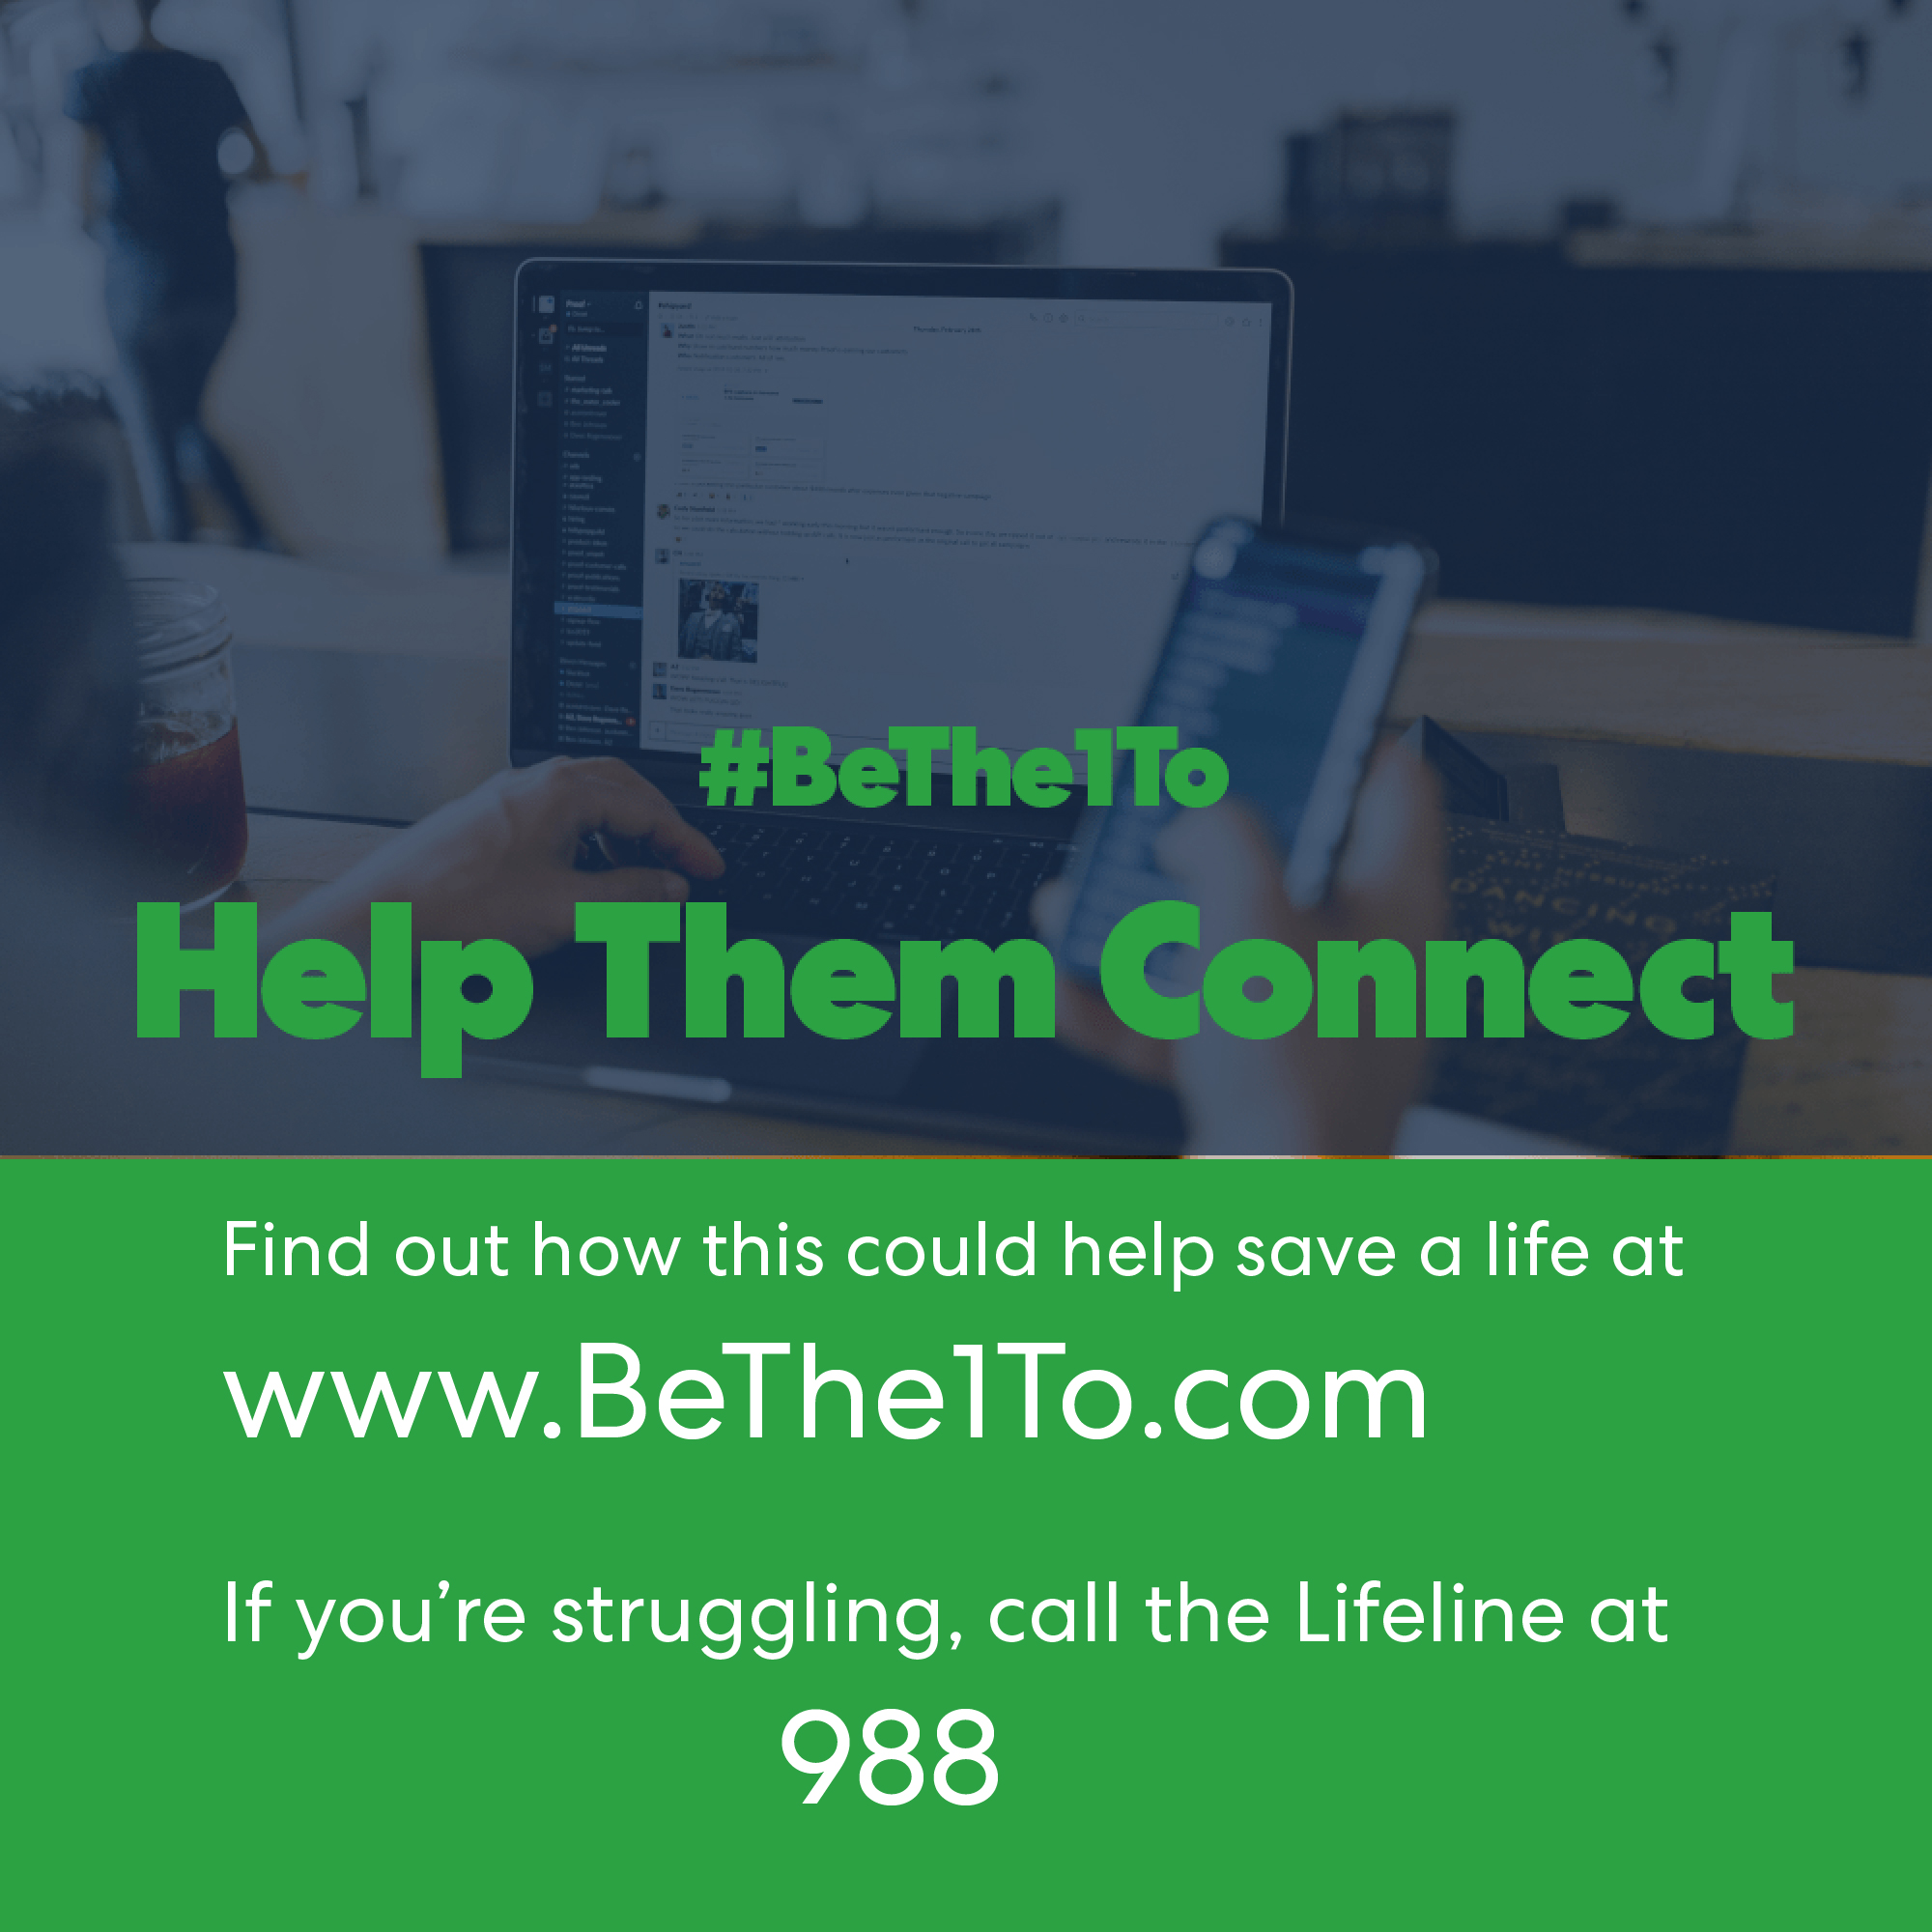  Get #BeThe1To Help Them Connect